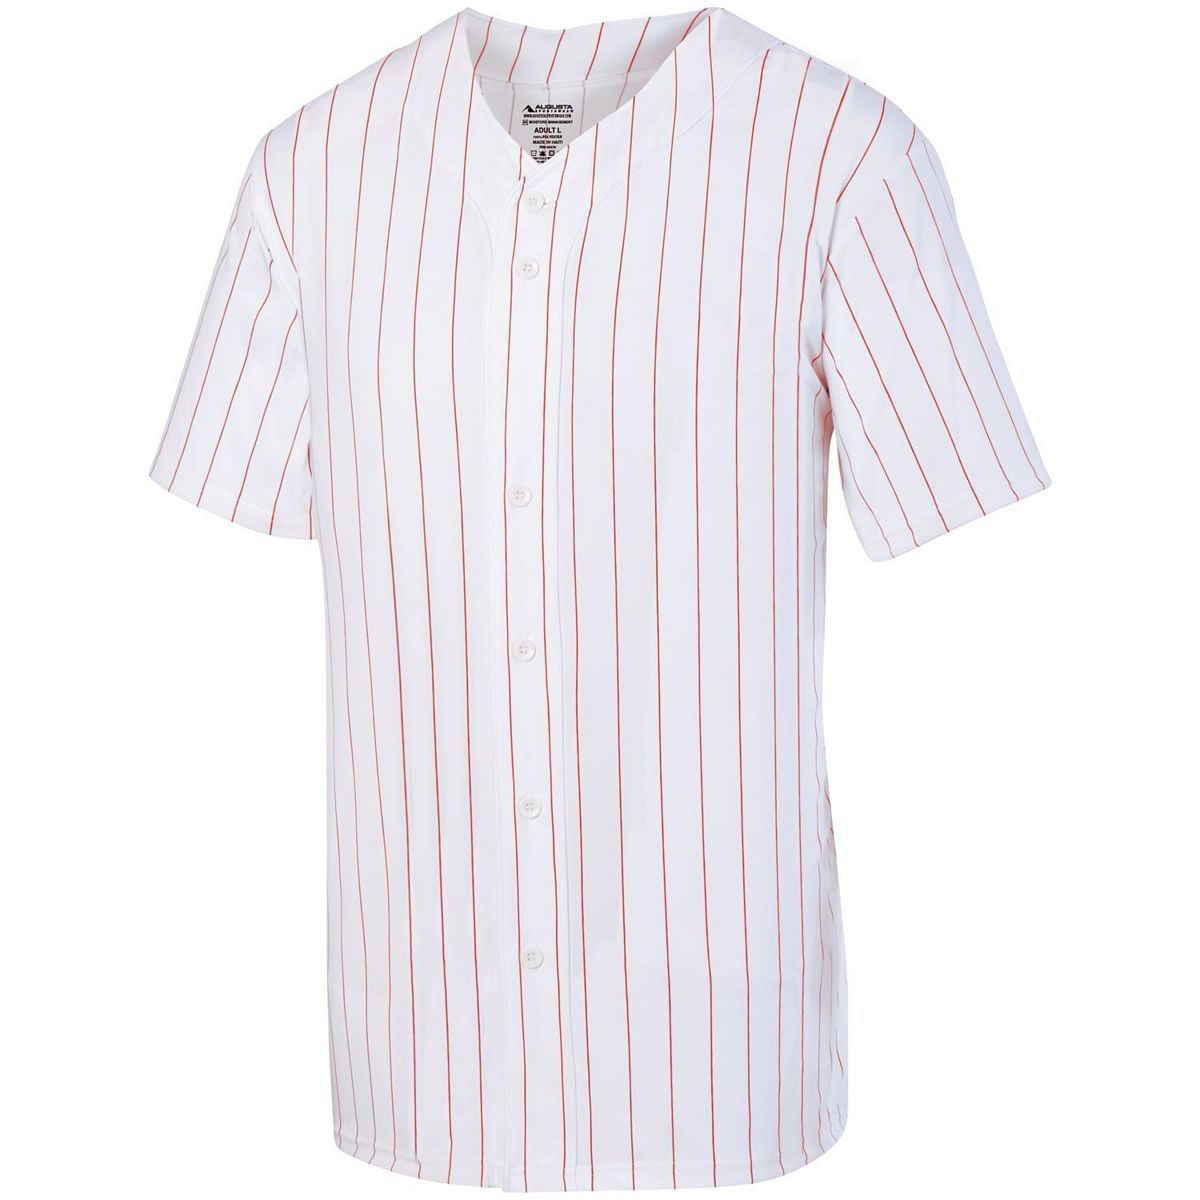 Custom Pink White Pinstripe Royal Authentic Baseball Jersey Discount